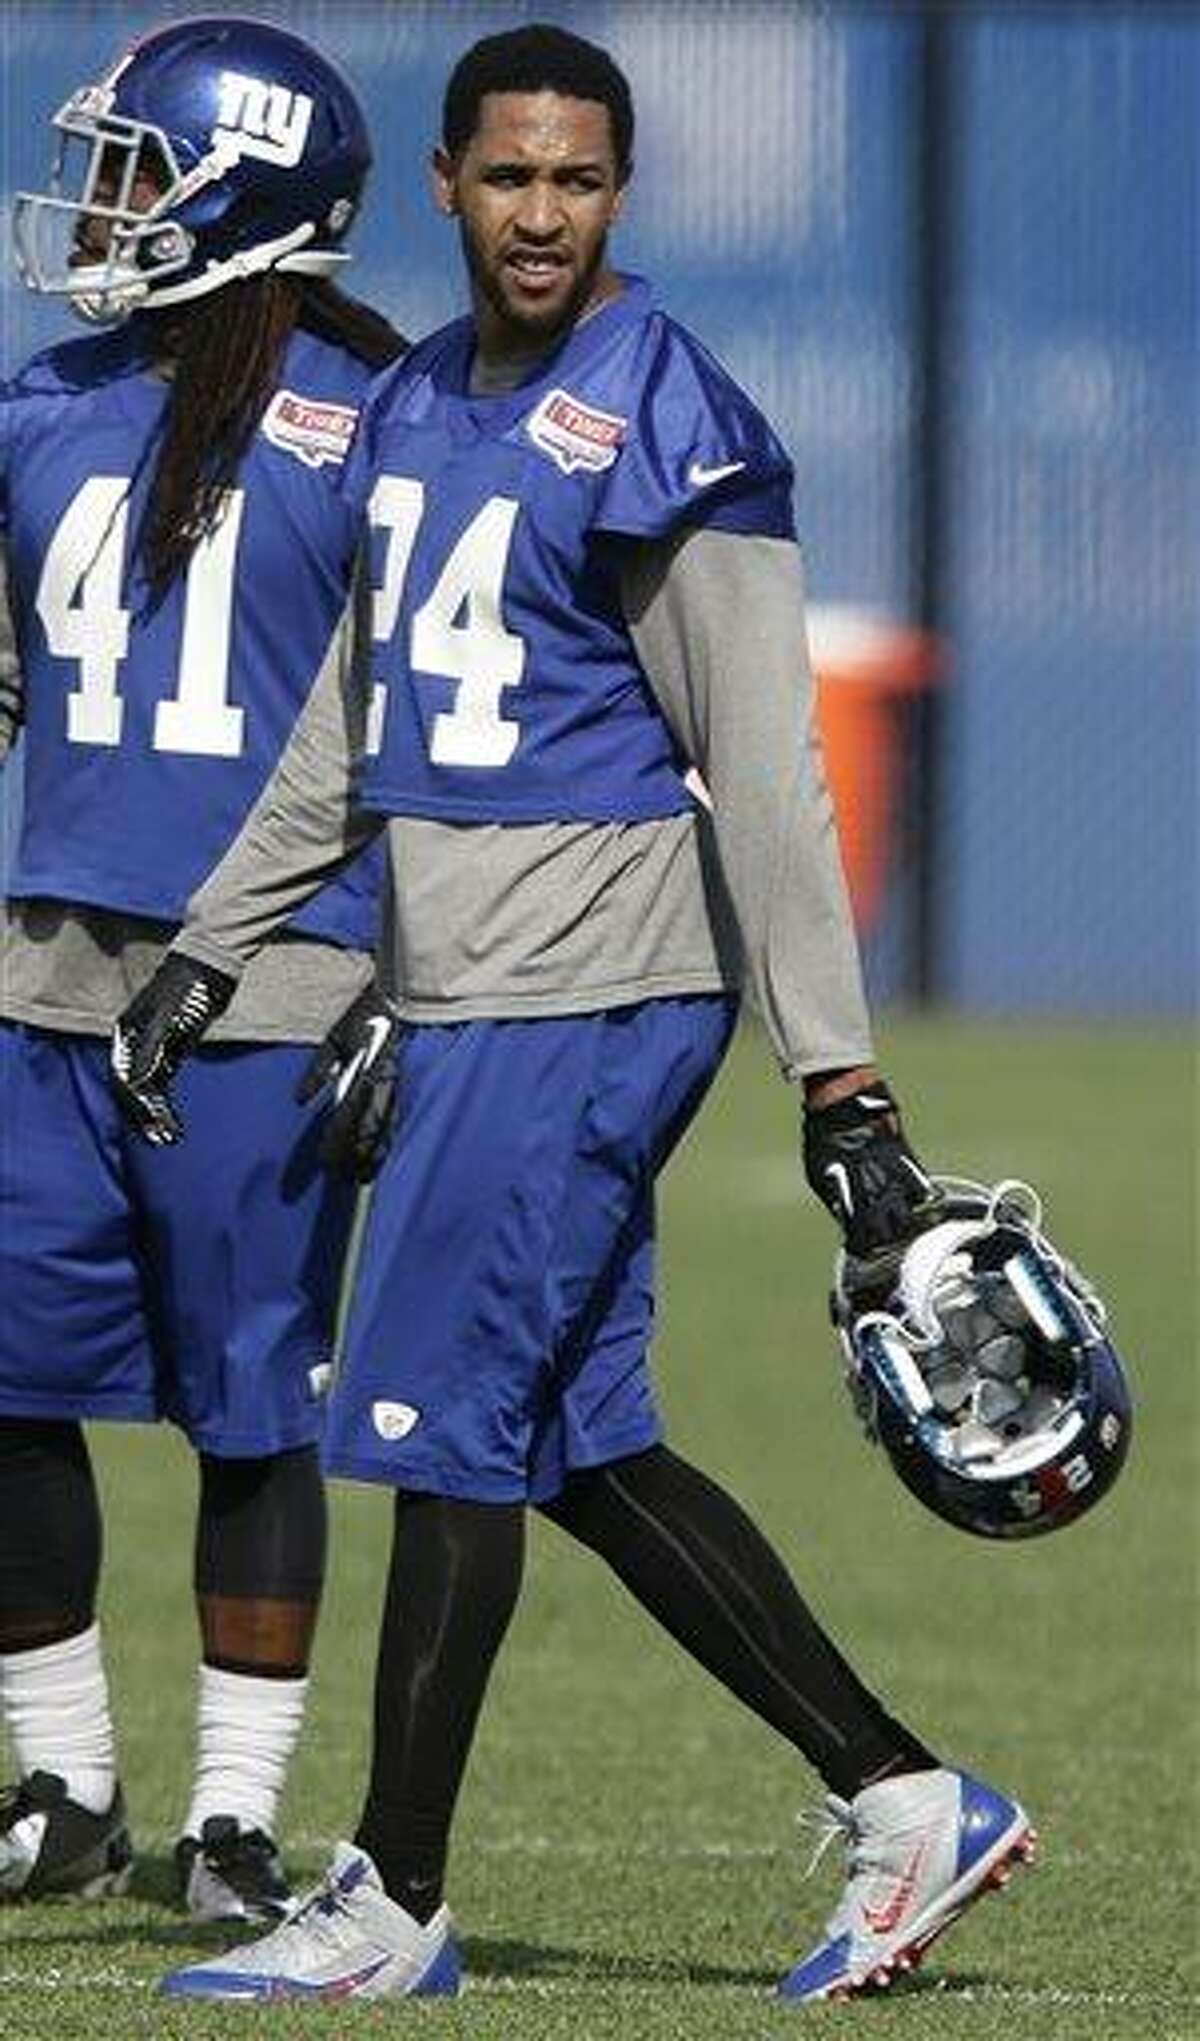 New York Giants' Terrell Thomas (24) walks on the field during mini camp Tuesday, June 11, 2013, in East Rutherford, N.J. (AP Photo/Frank Franklin II)